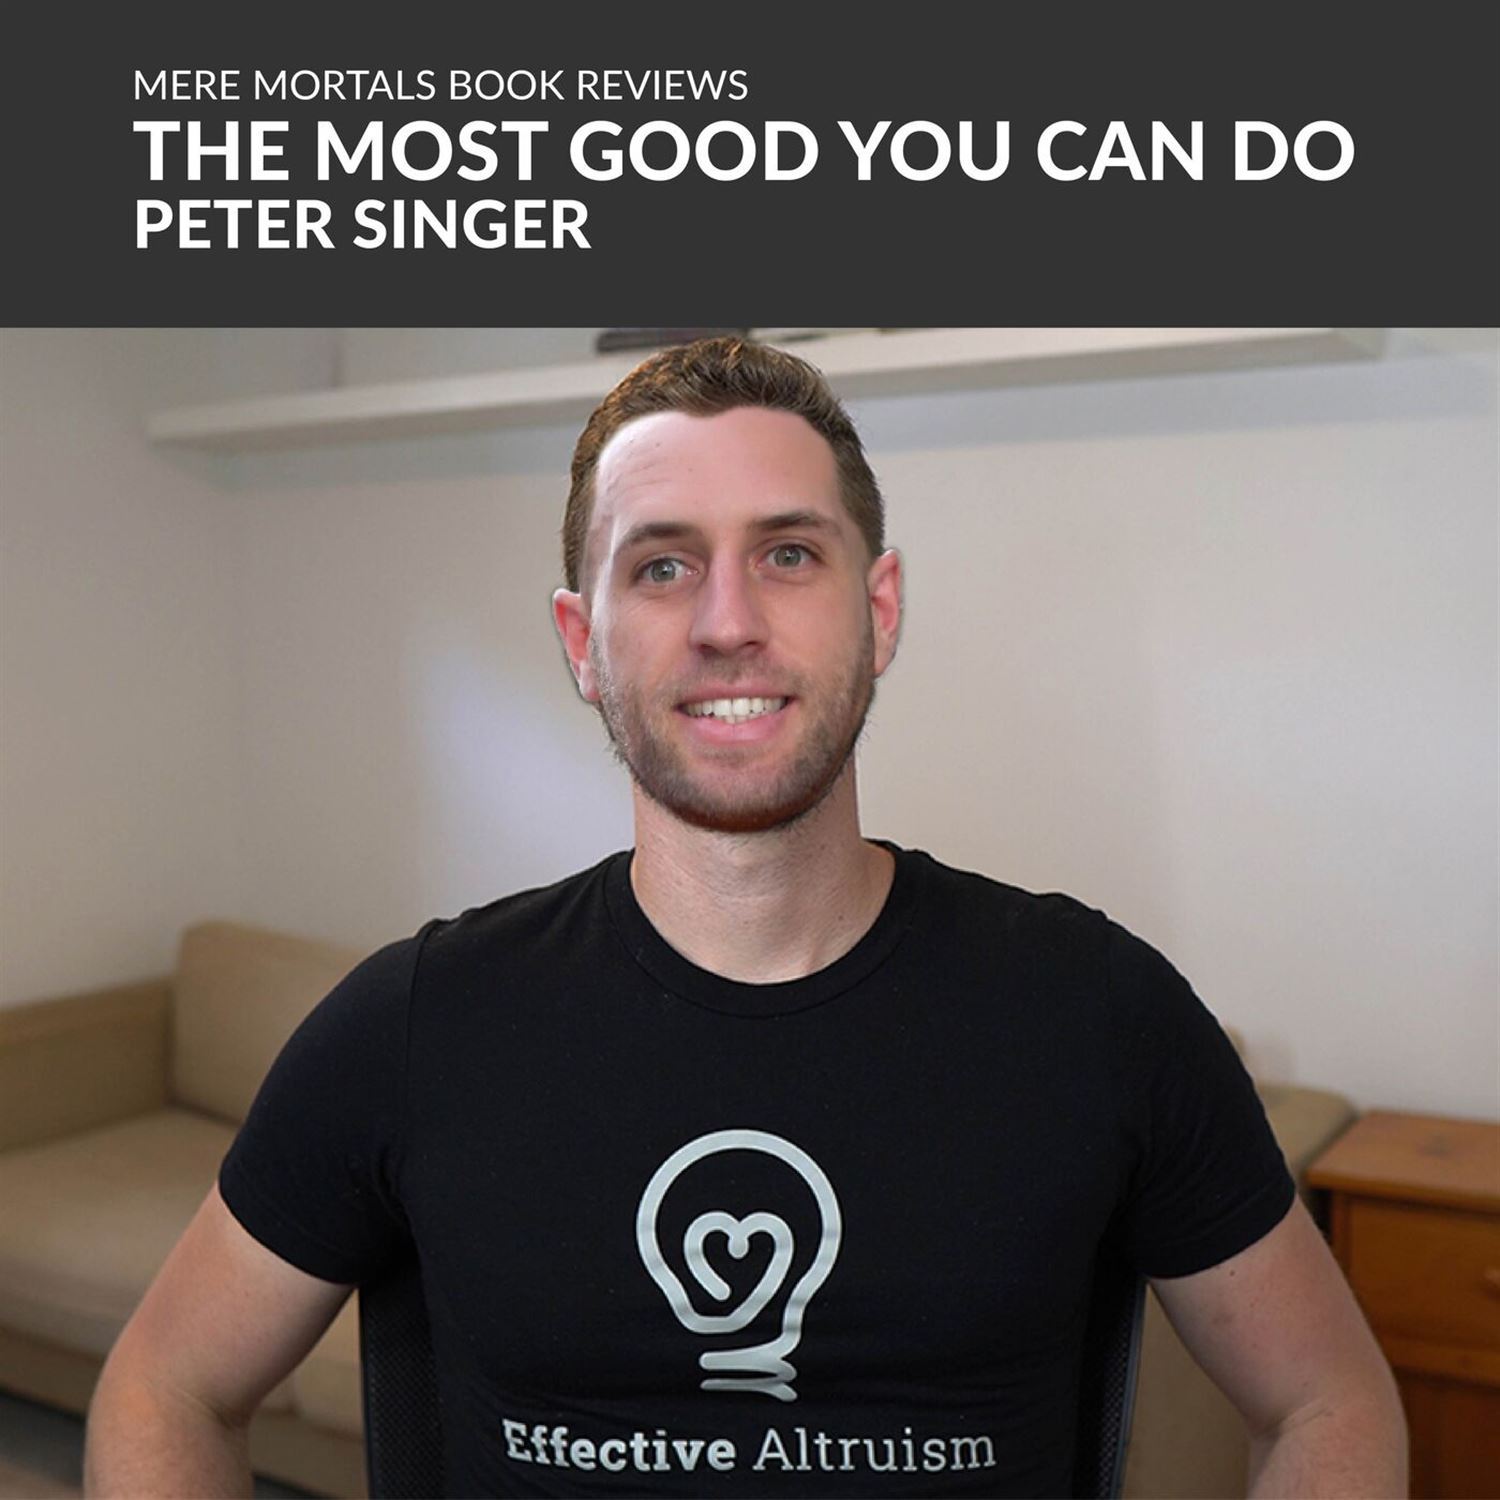 The Most Good You Can Do book by Peter Singer